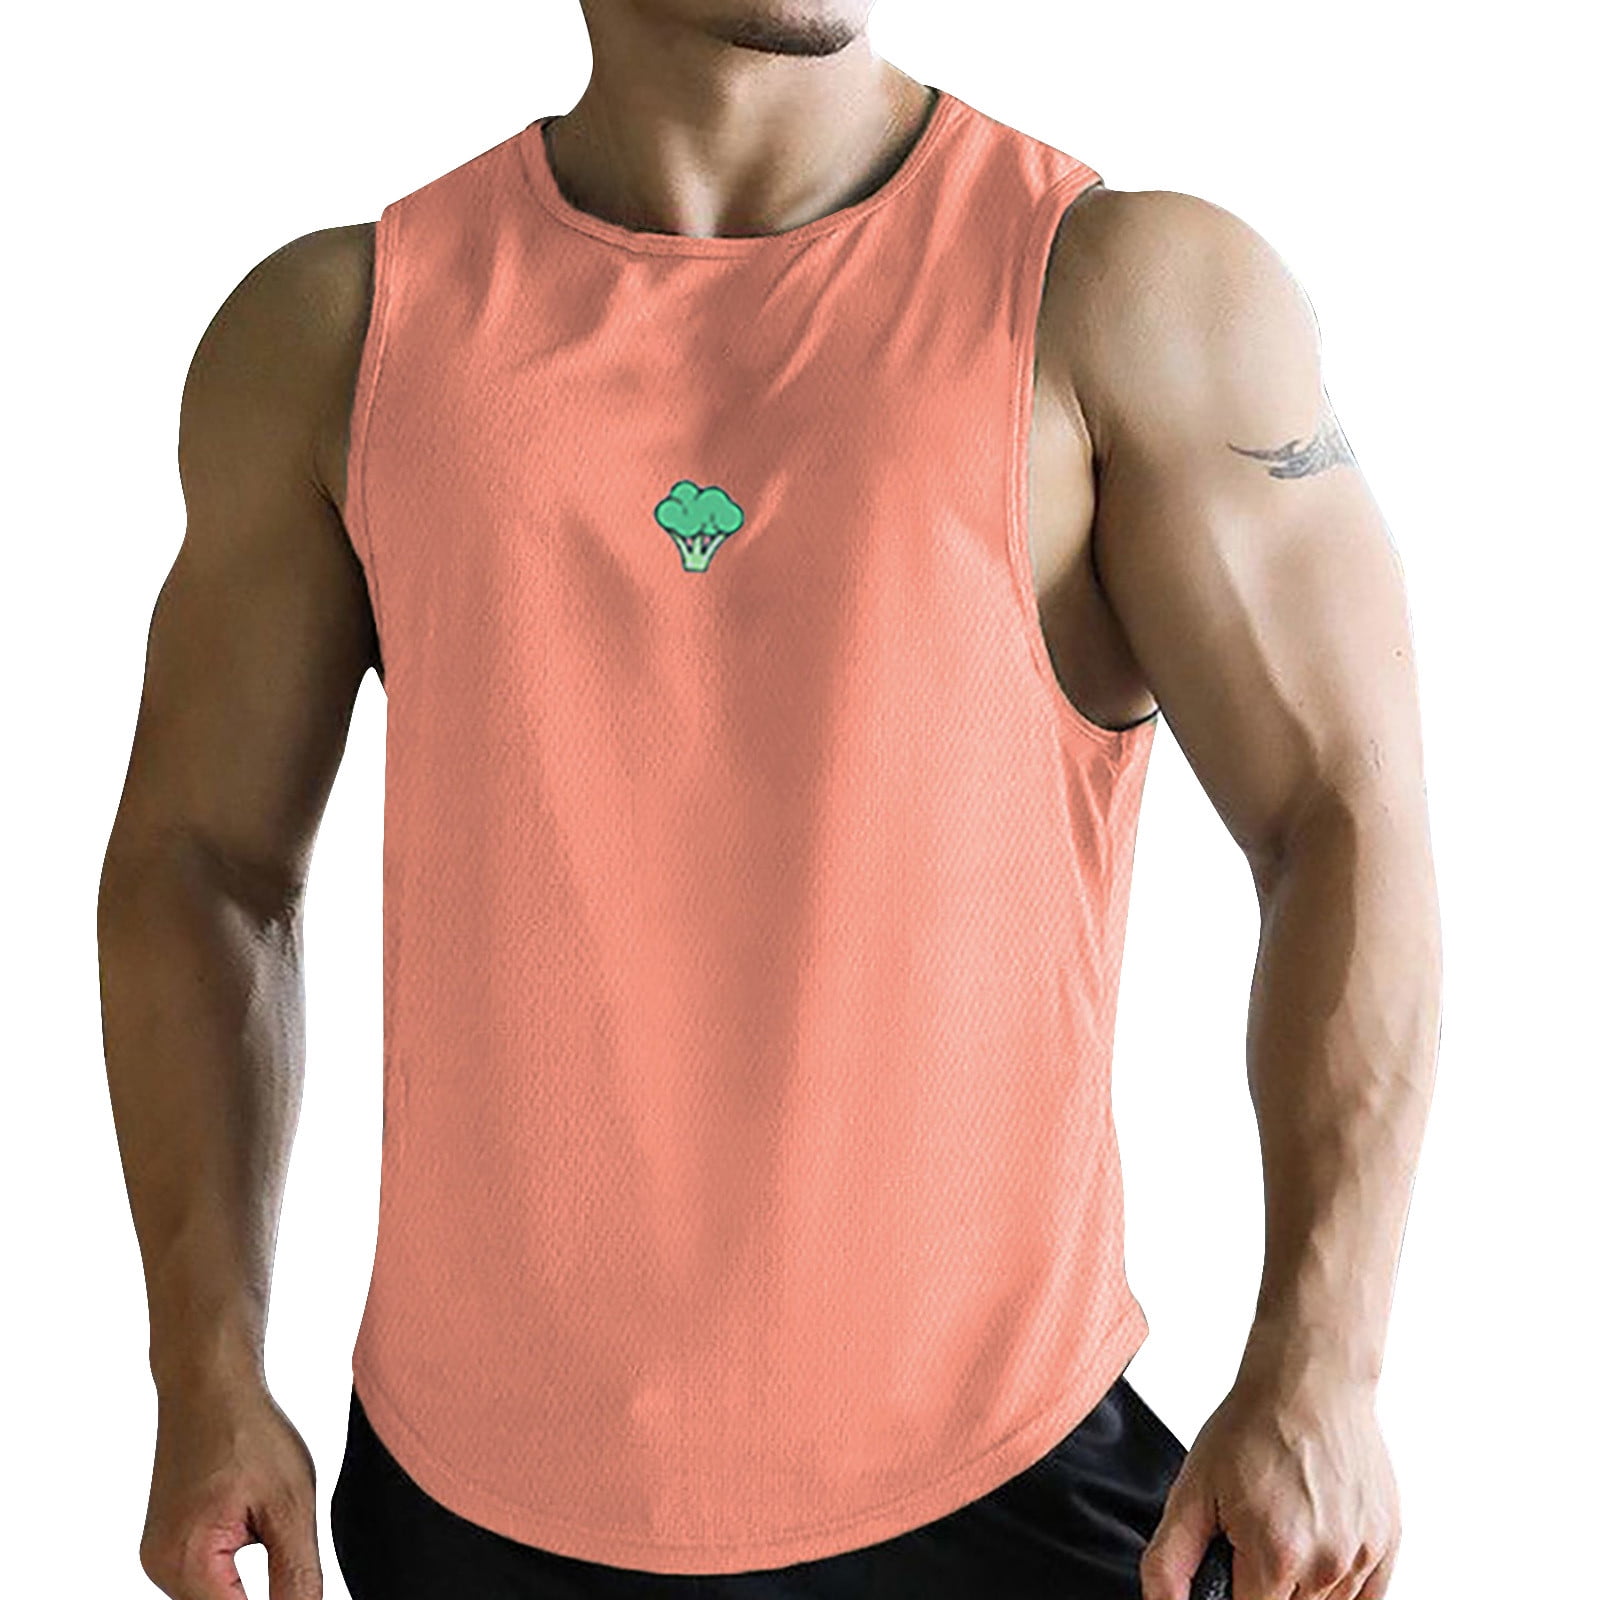 Mens Solid Cotton Tank Top Sleeveless Tee Shirt for Sports, Gym